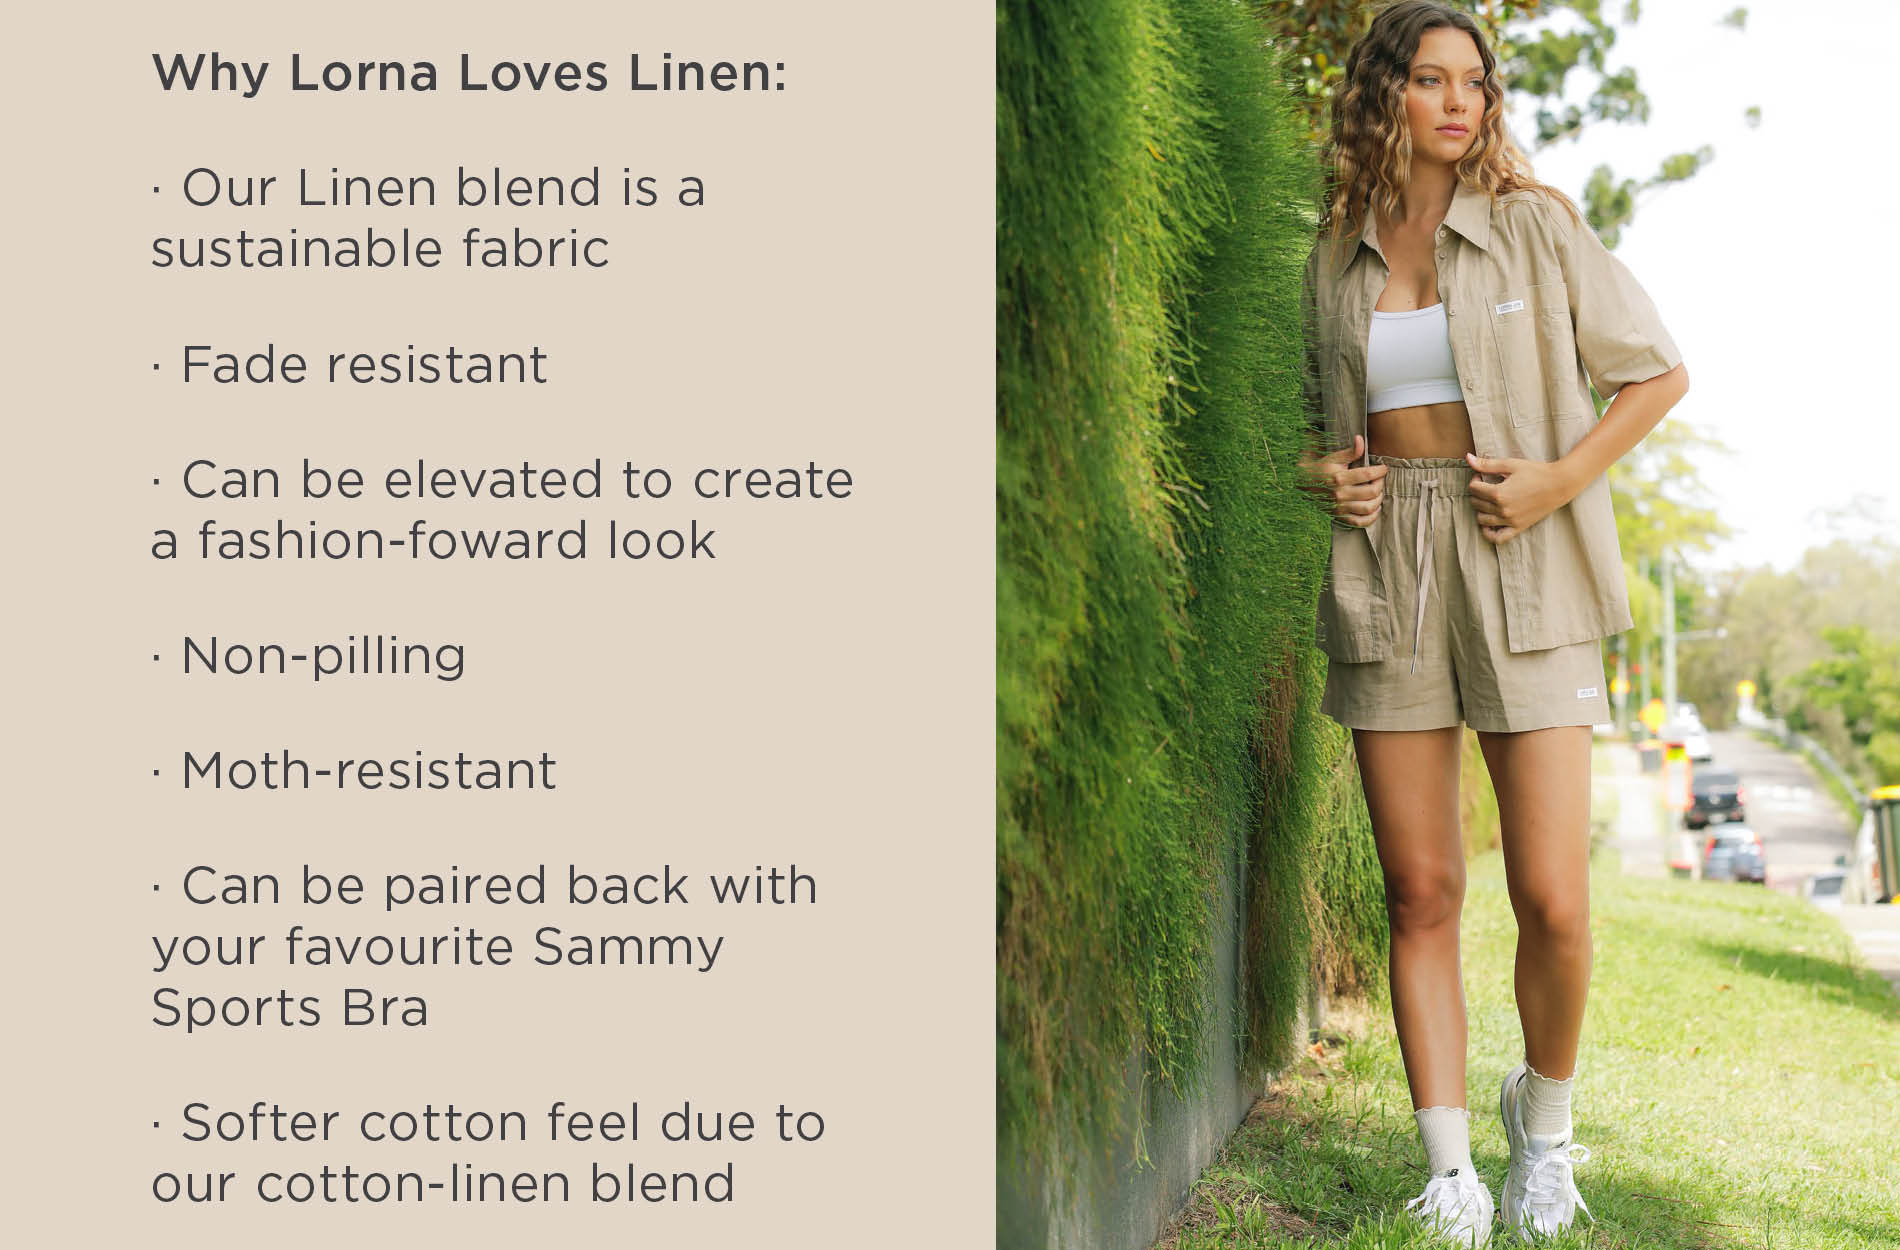 The Lorna Jane Linen Loungewear Collection dot points